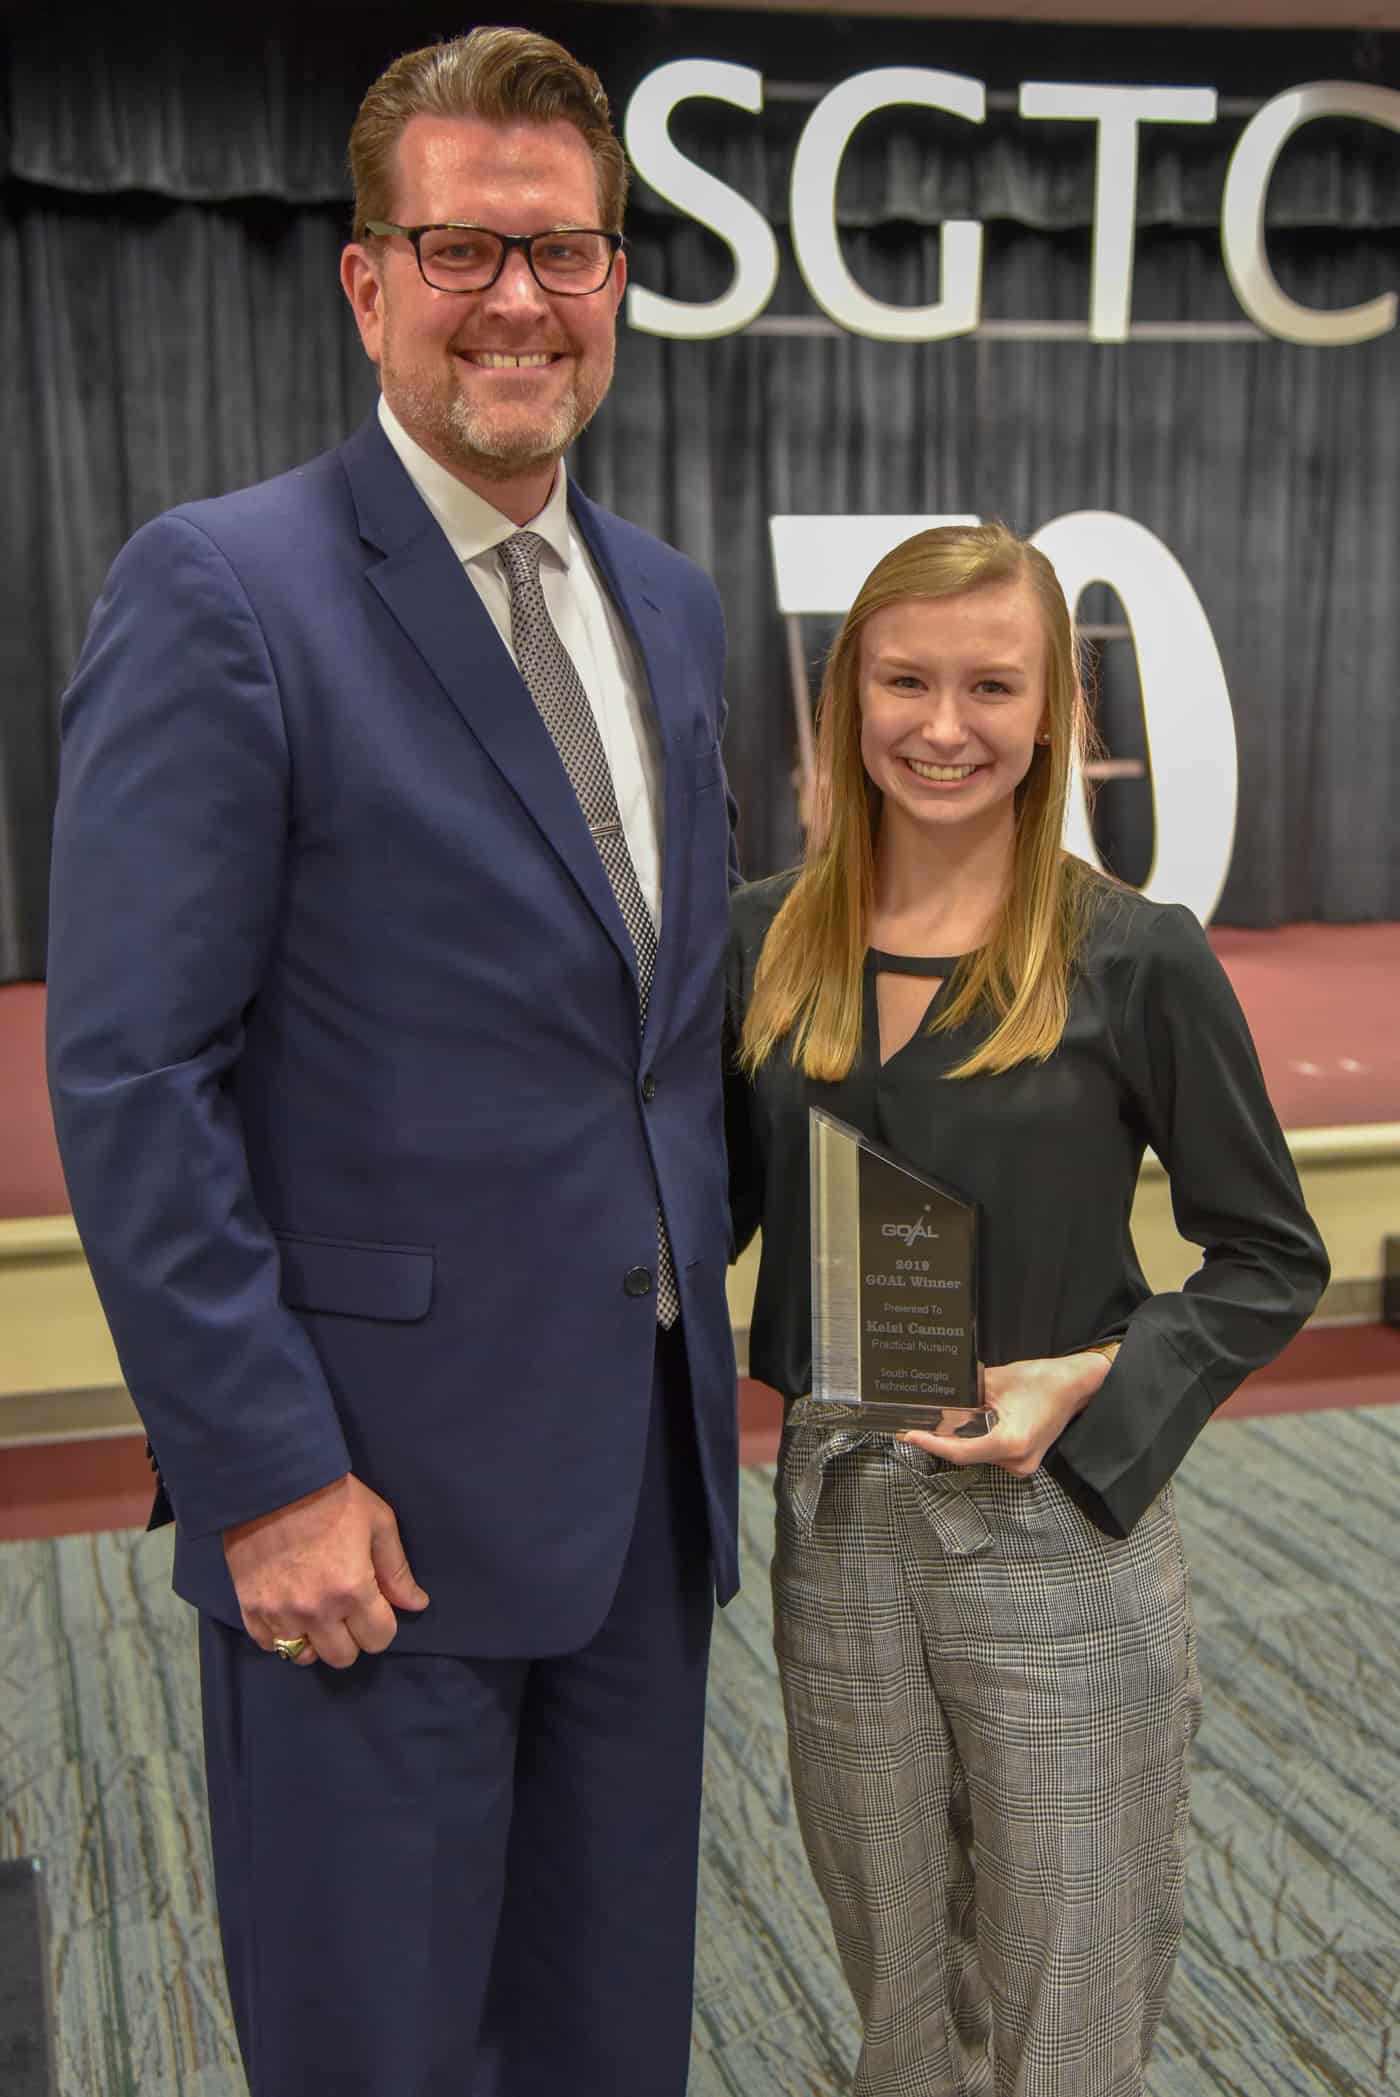 SGTC’s 2019 GOAL Winner Kelsi Cannon (shown above) with SGTC President Dr. John Watford, will be the speaker at SGTC’s Spring Graduation Exercise on Thursday, May 2nd, 2019.